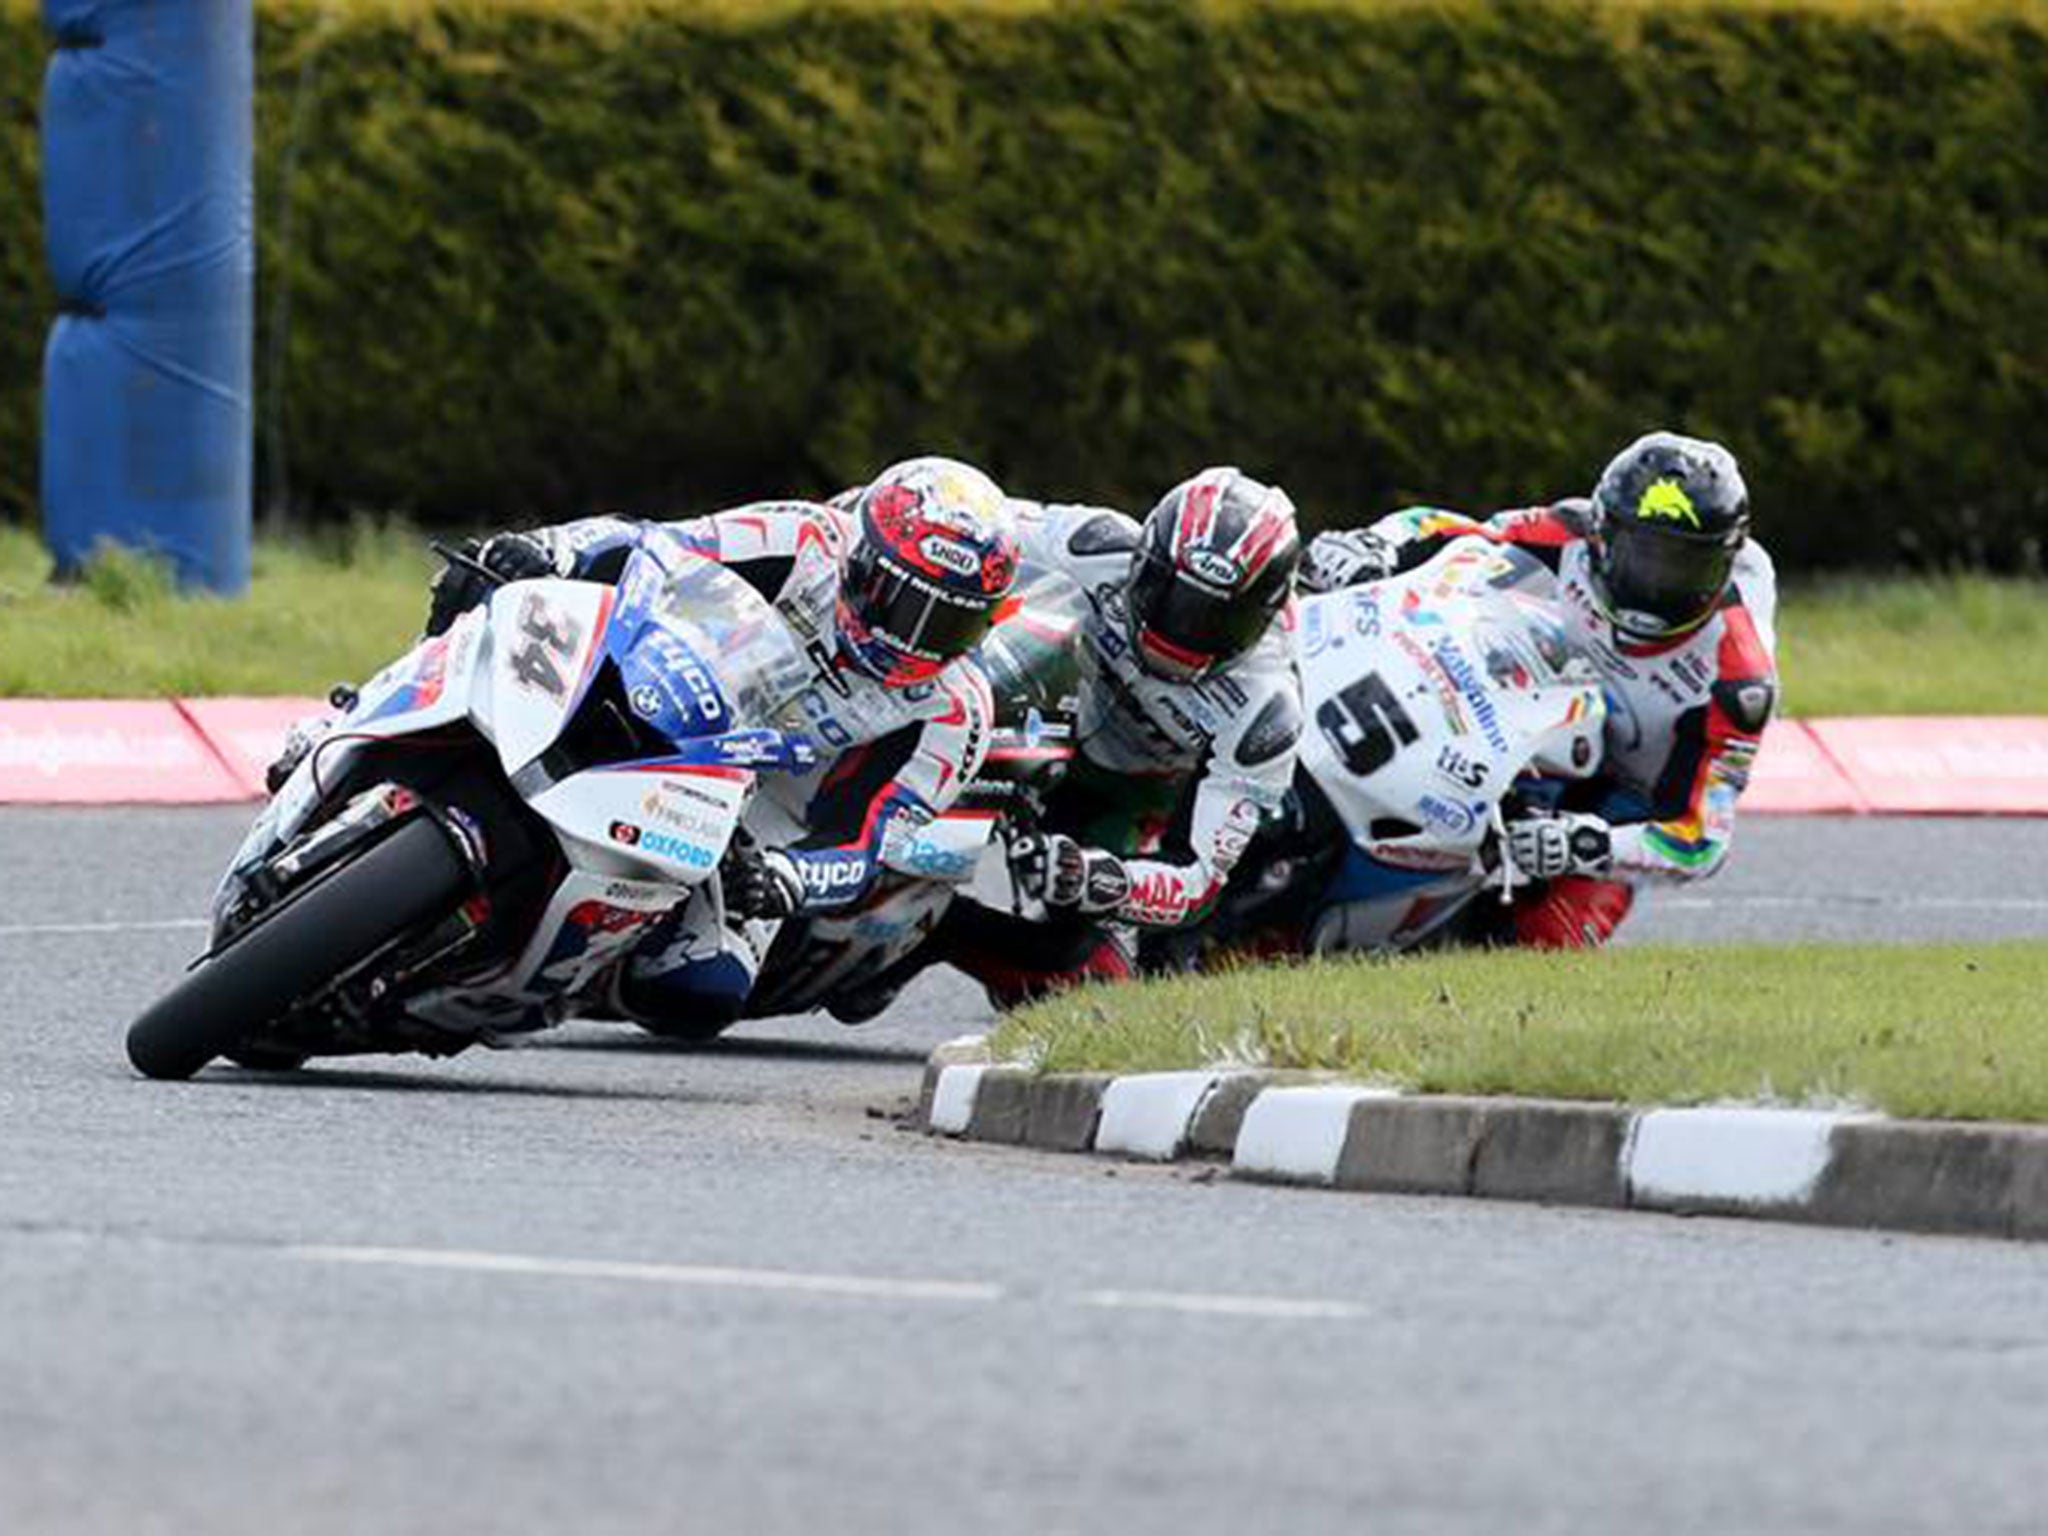 Alastair Seeley leads Ian Hutchinson and Bruce Anstey in the North West 200 Superbike race